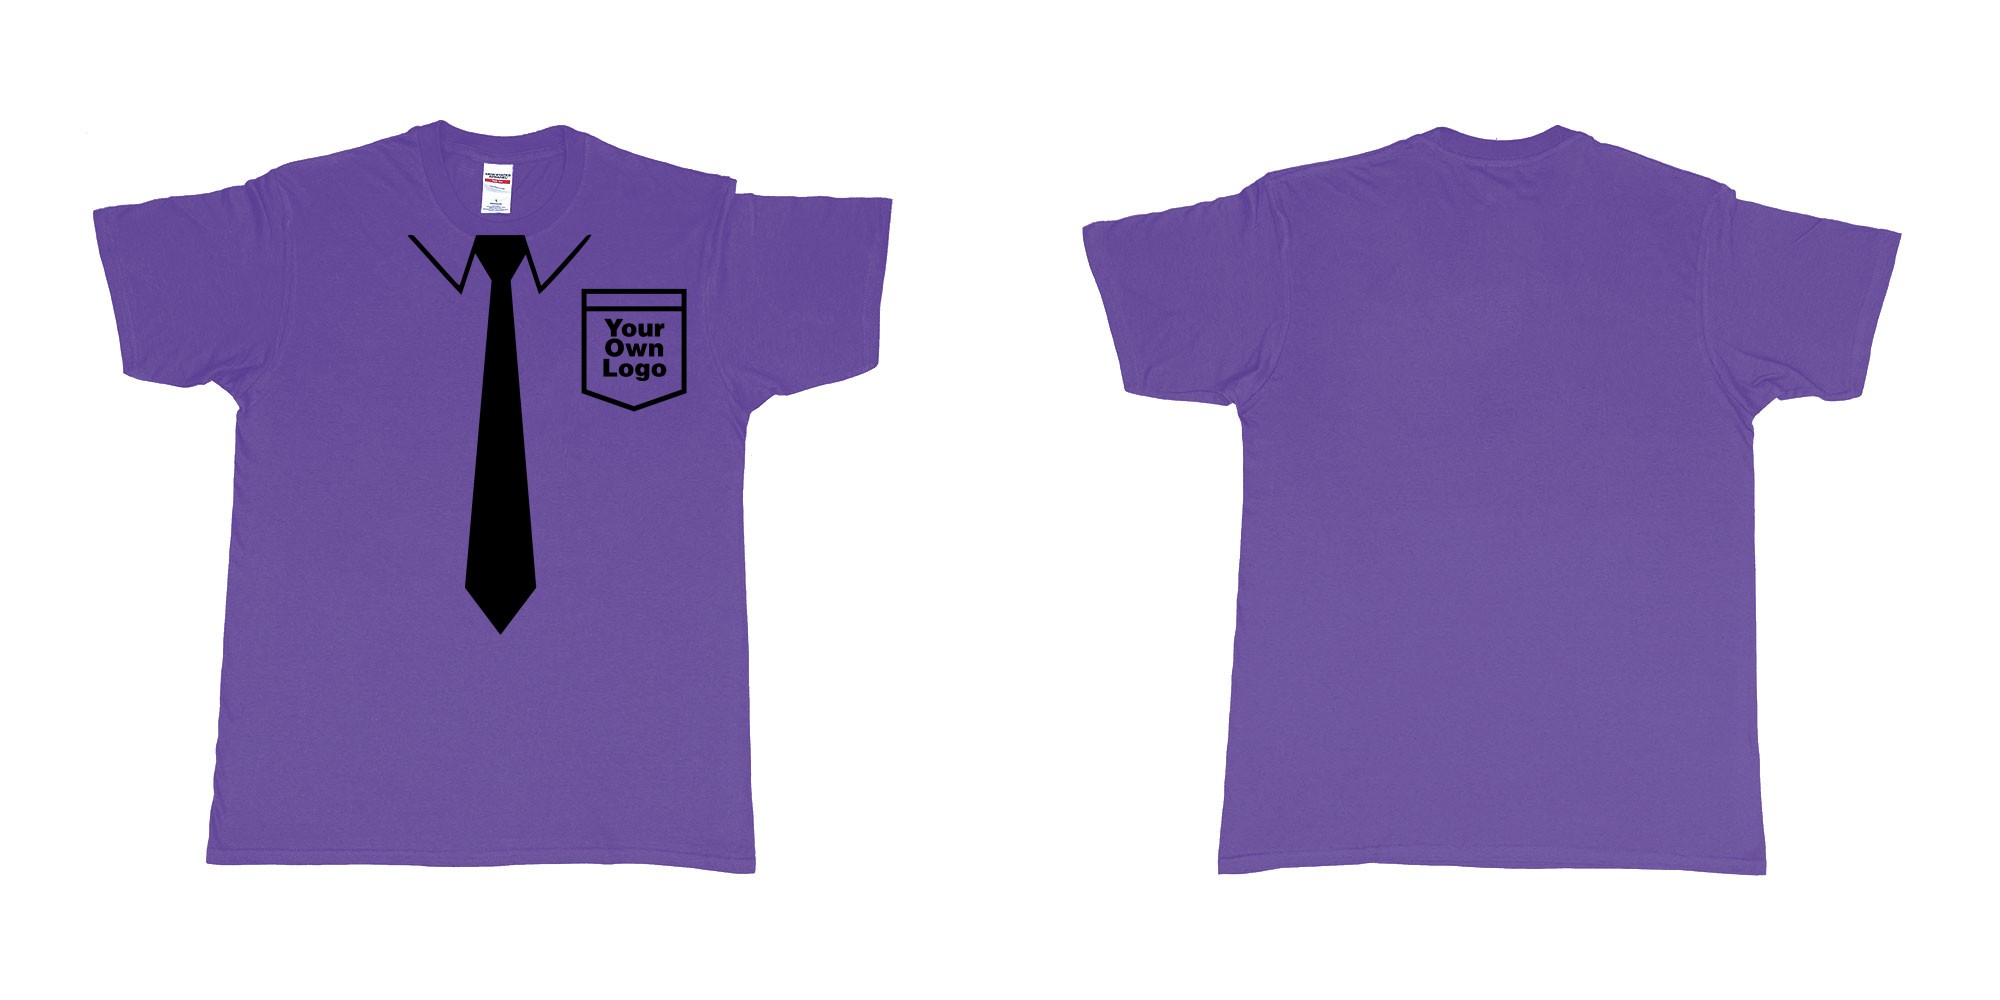 Custom tshirt design staff uniform with tie pocket own logo bali in fabric color purple choice your own text made in Bali by The Pirate Way